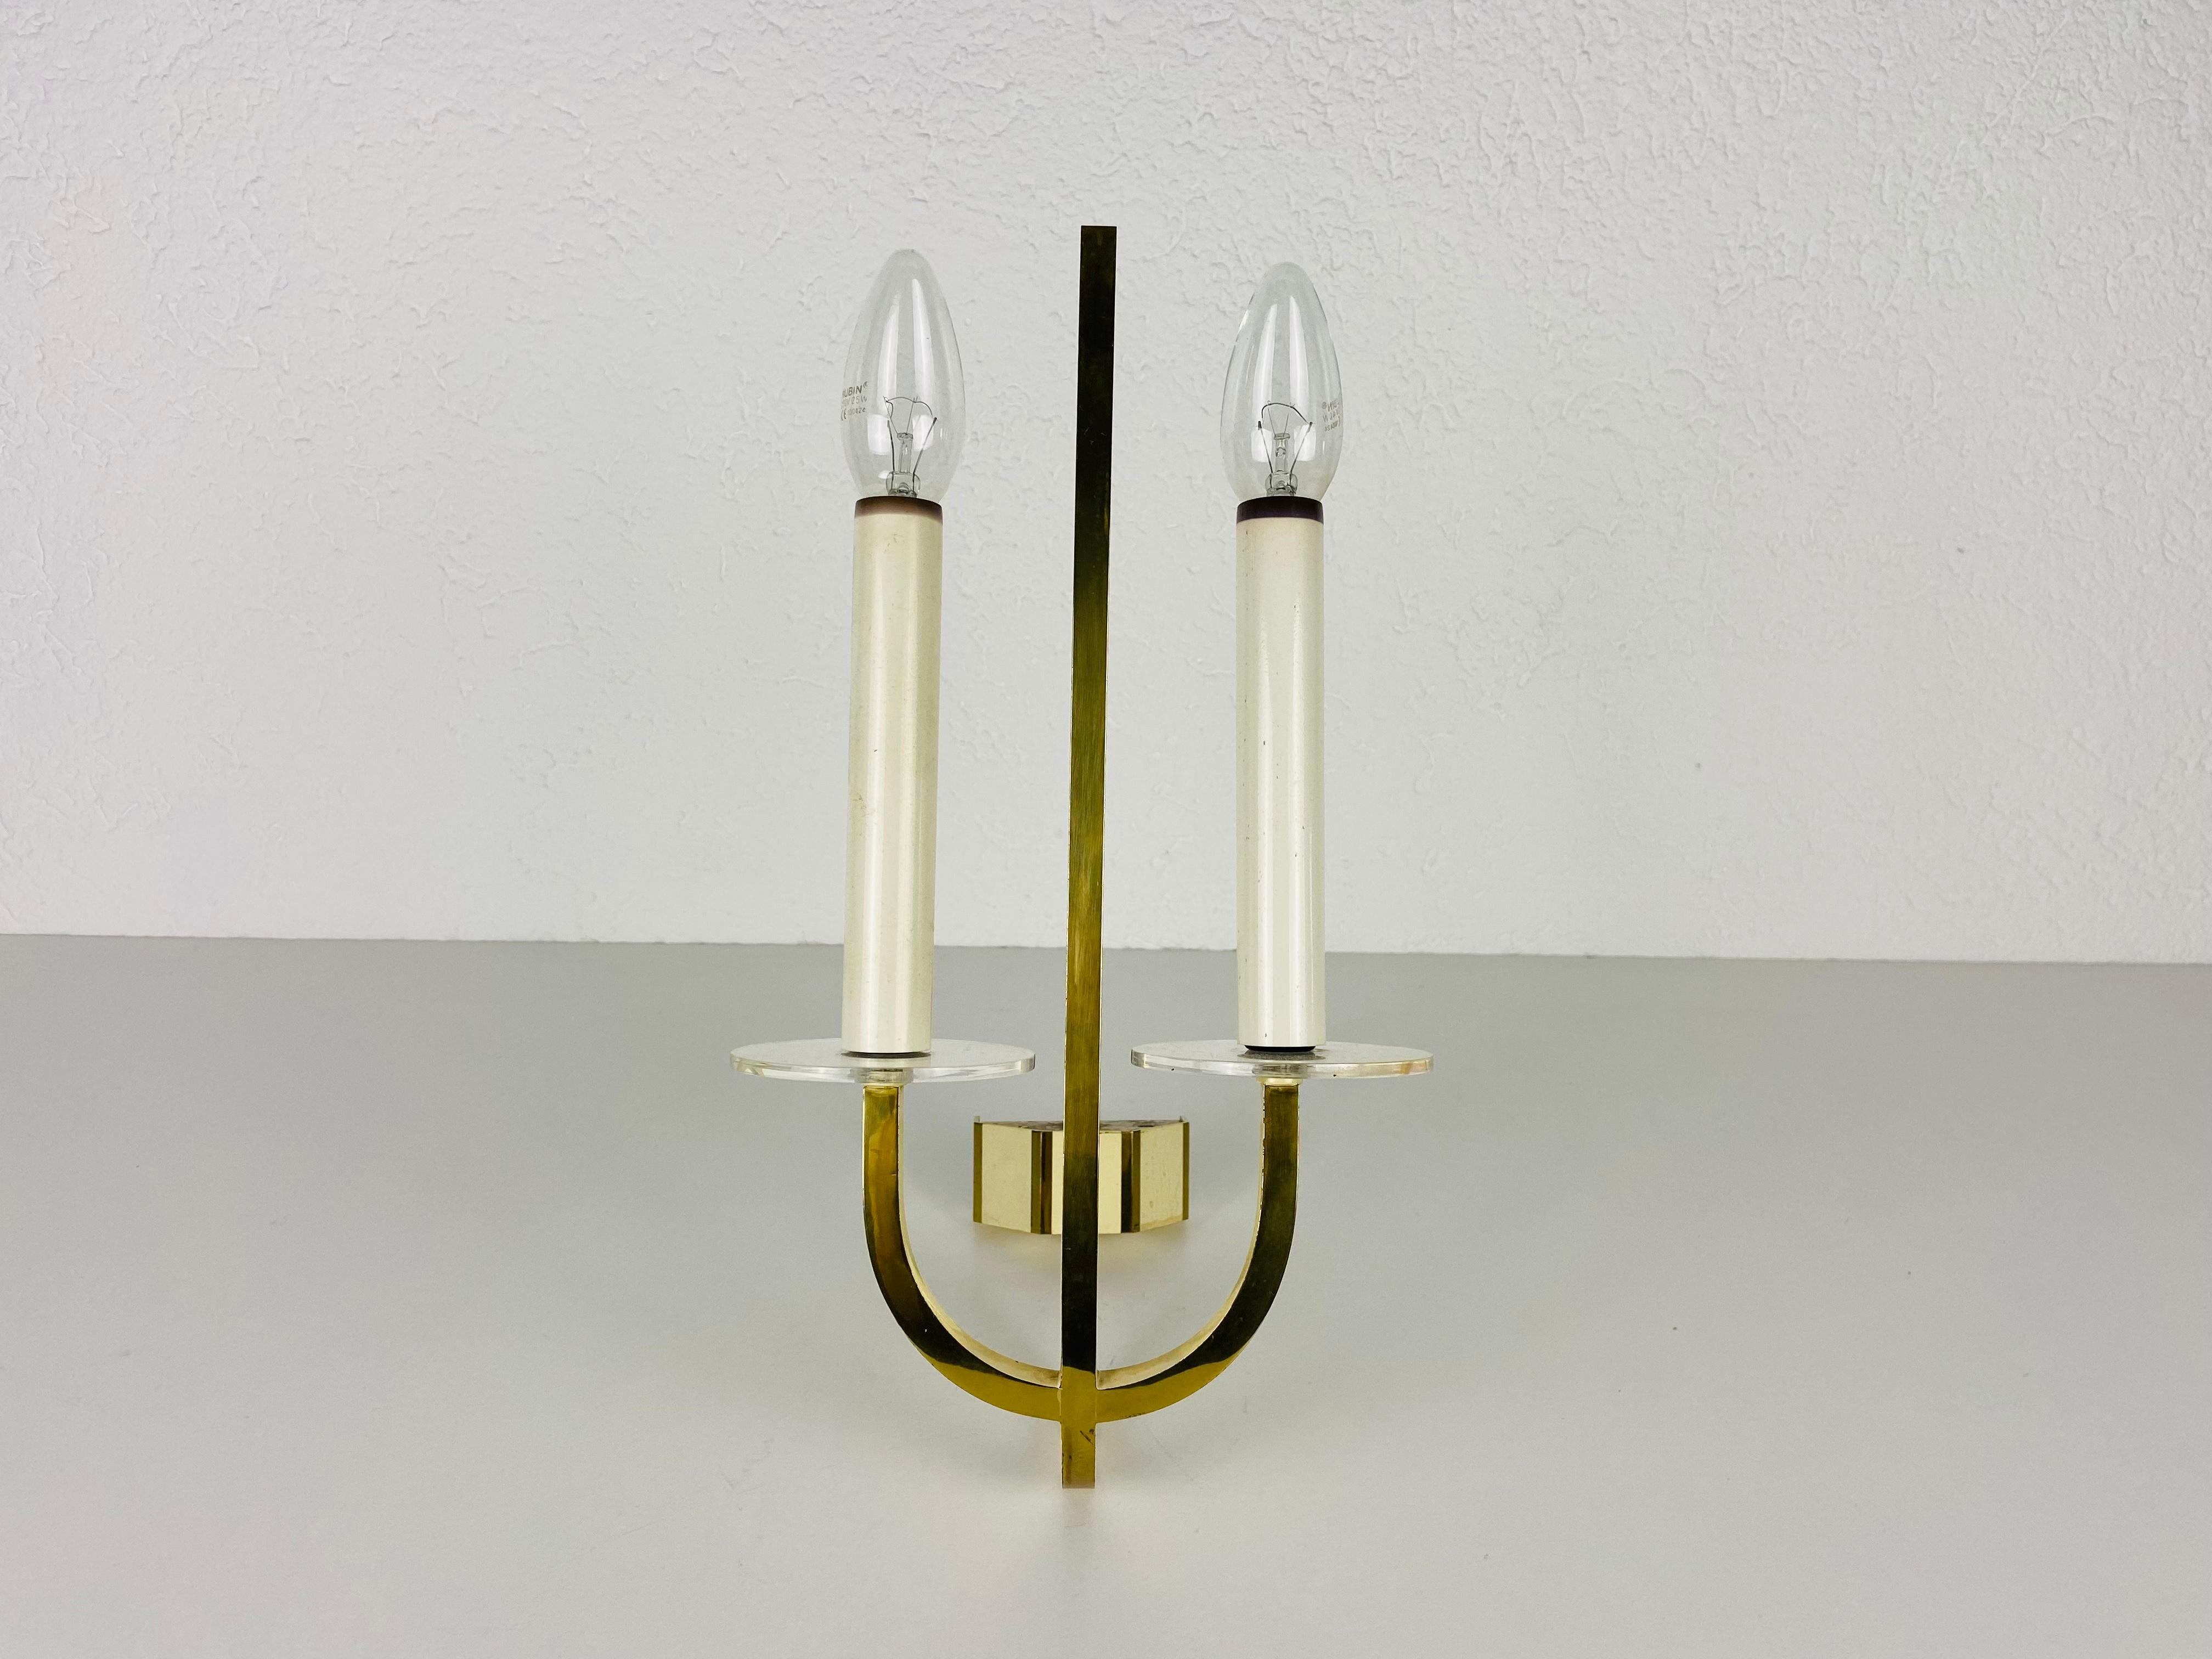 Brass and glass sconces made in Germany in the 1960s. The lamps are in a very good condition.

The lights require E14 light bulbs. Works with both 120/220V. 

Free worldwide express shipping.